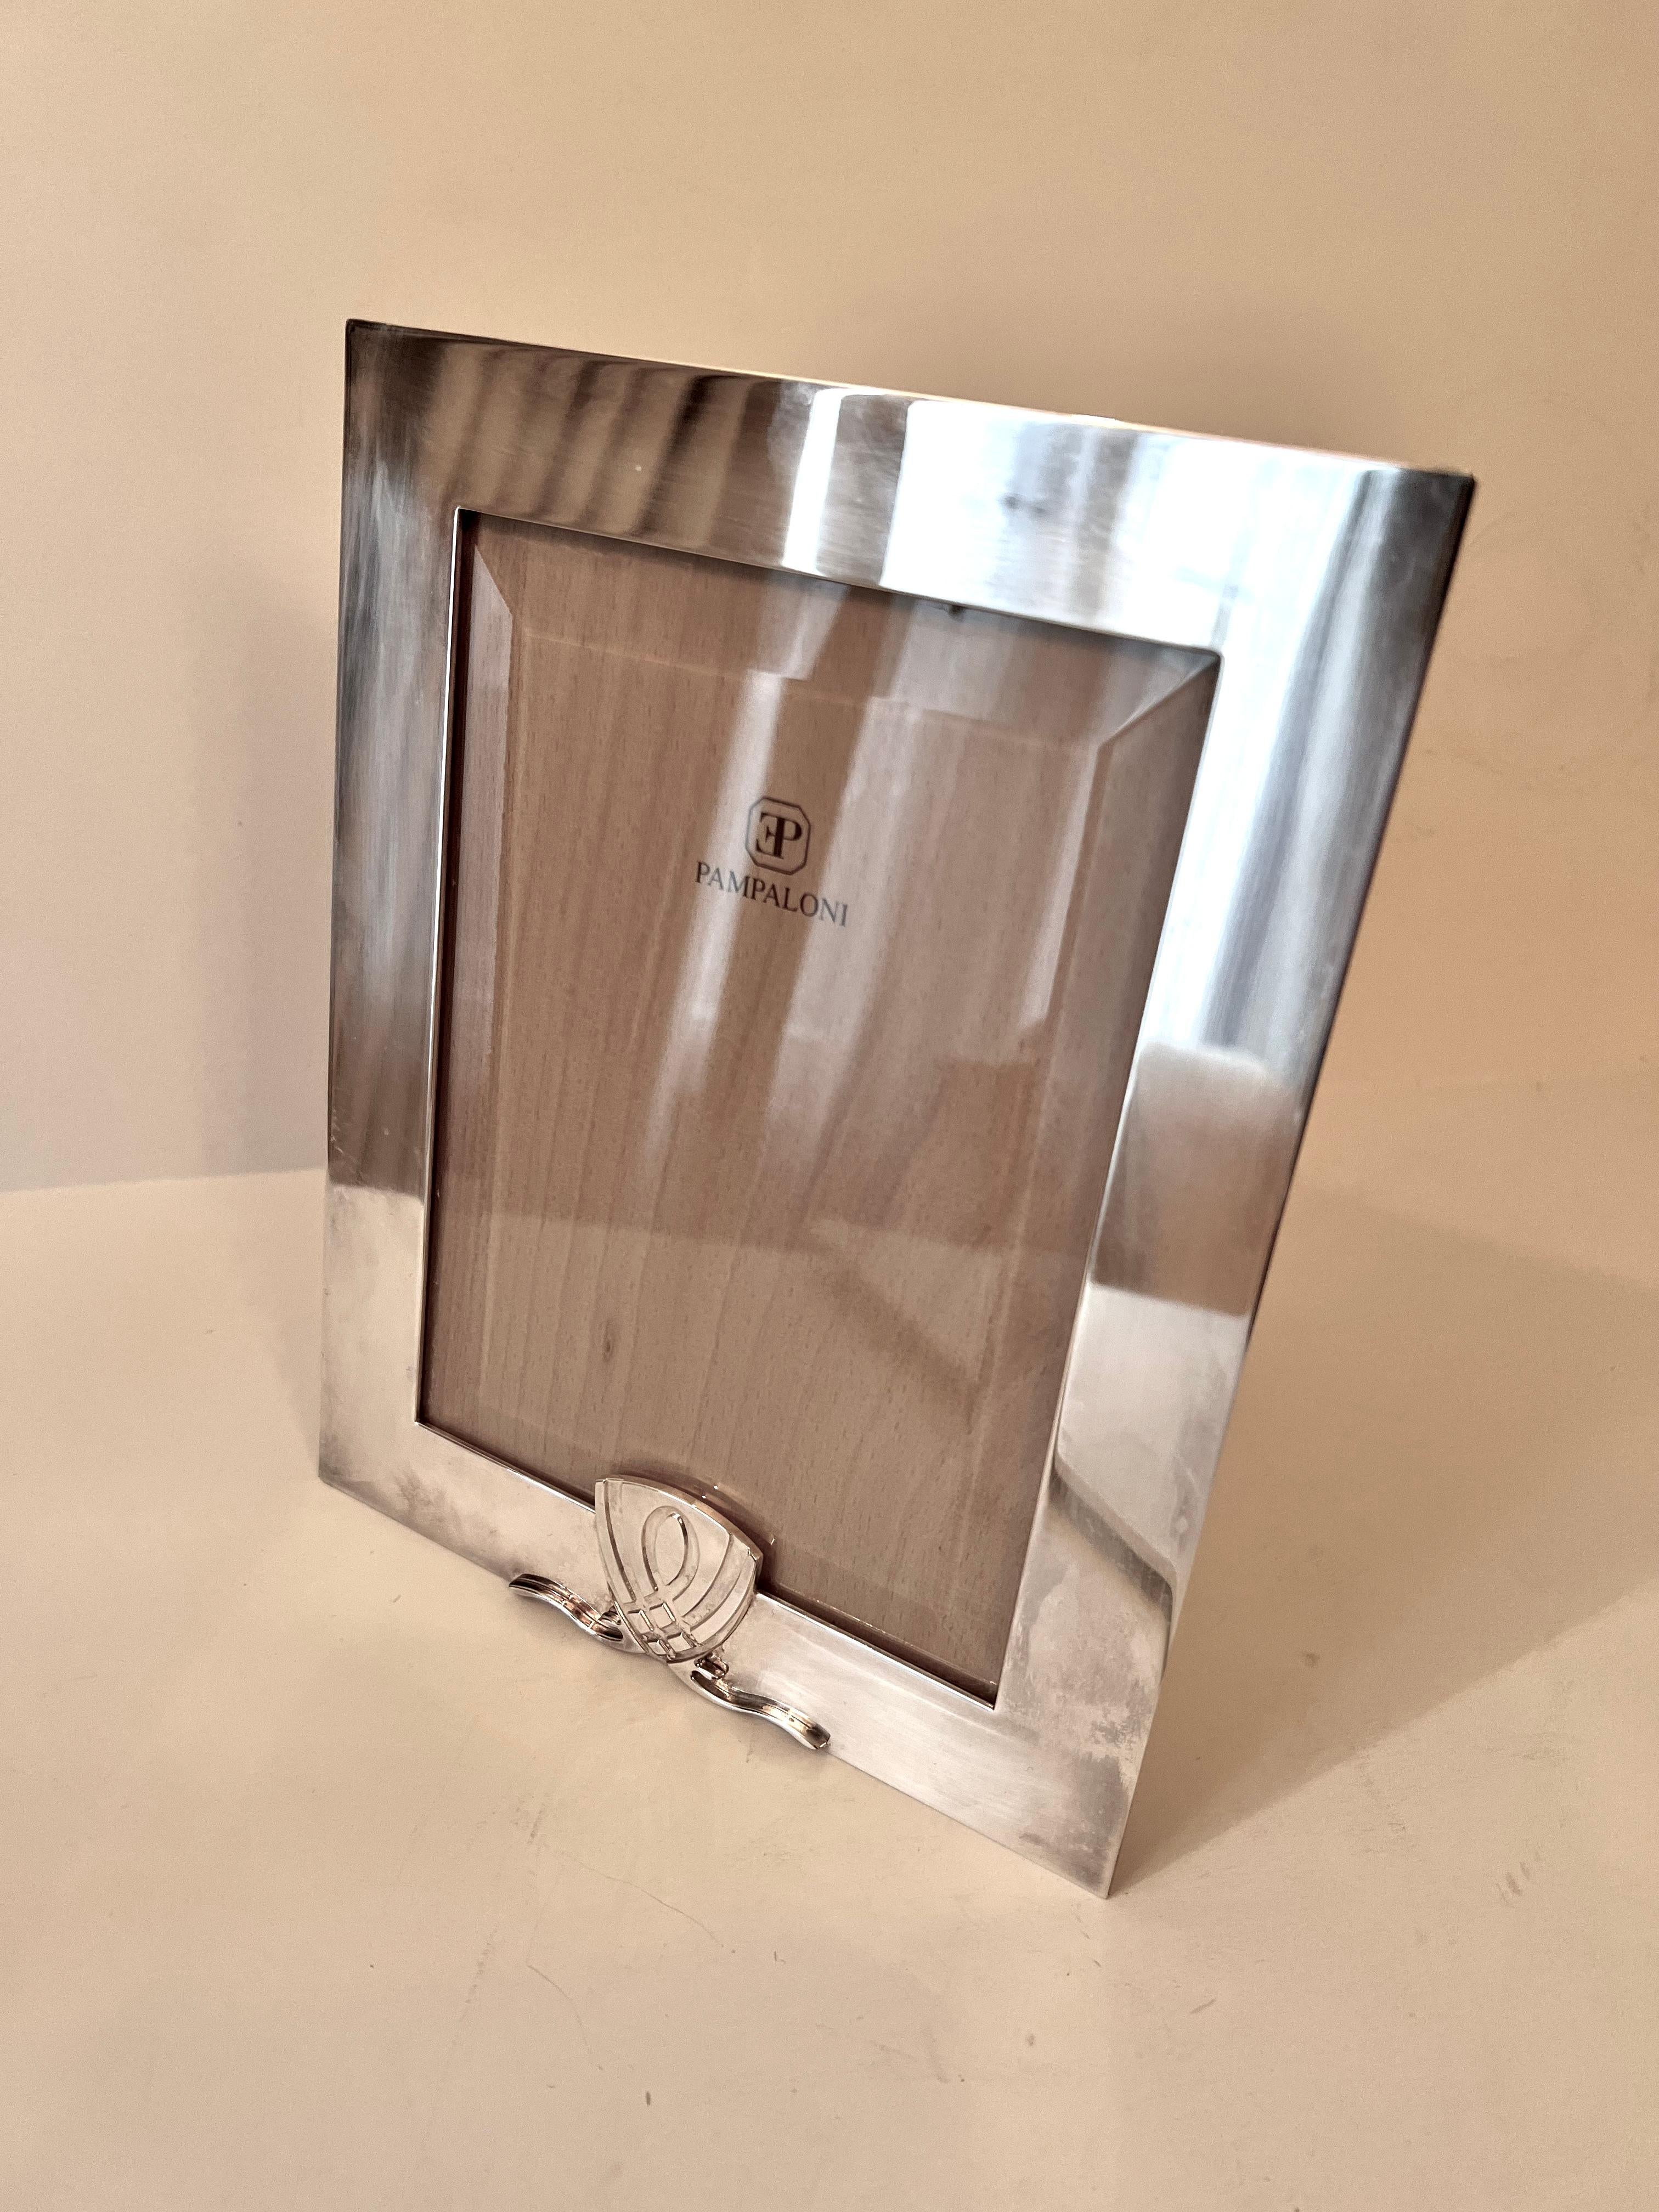 A very nice pampaloni frame in silver plate with a detail bottom center.  the piece is polished but does have some signs of Matte area... a great piece for any shelf, desk or work station.  Perfect to display loved ones.  A great wedding or